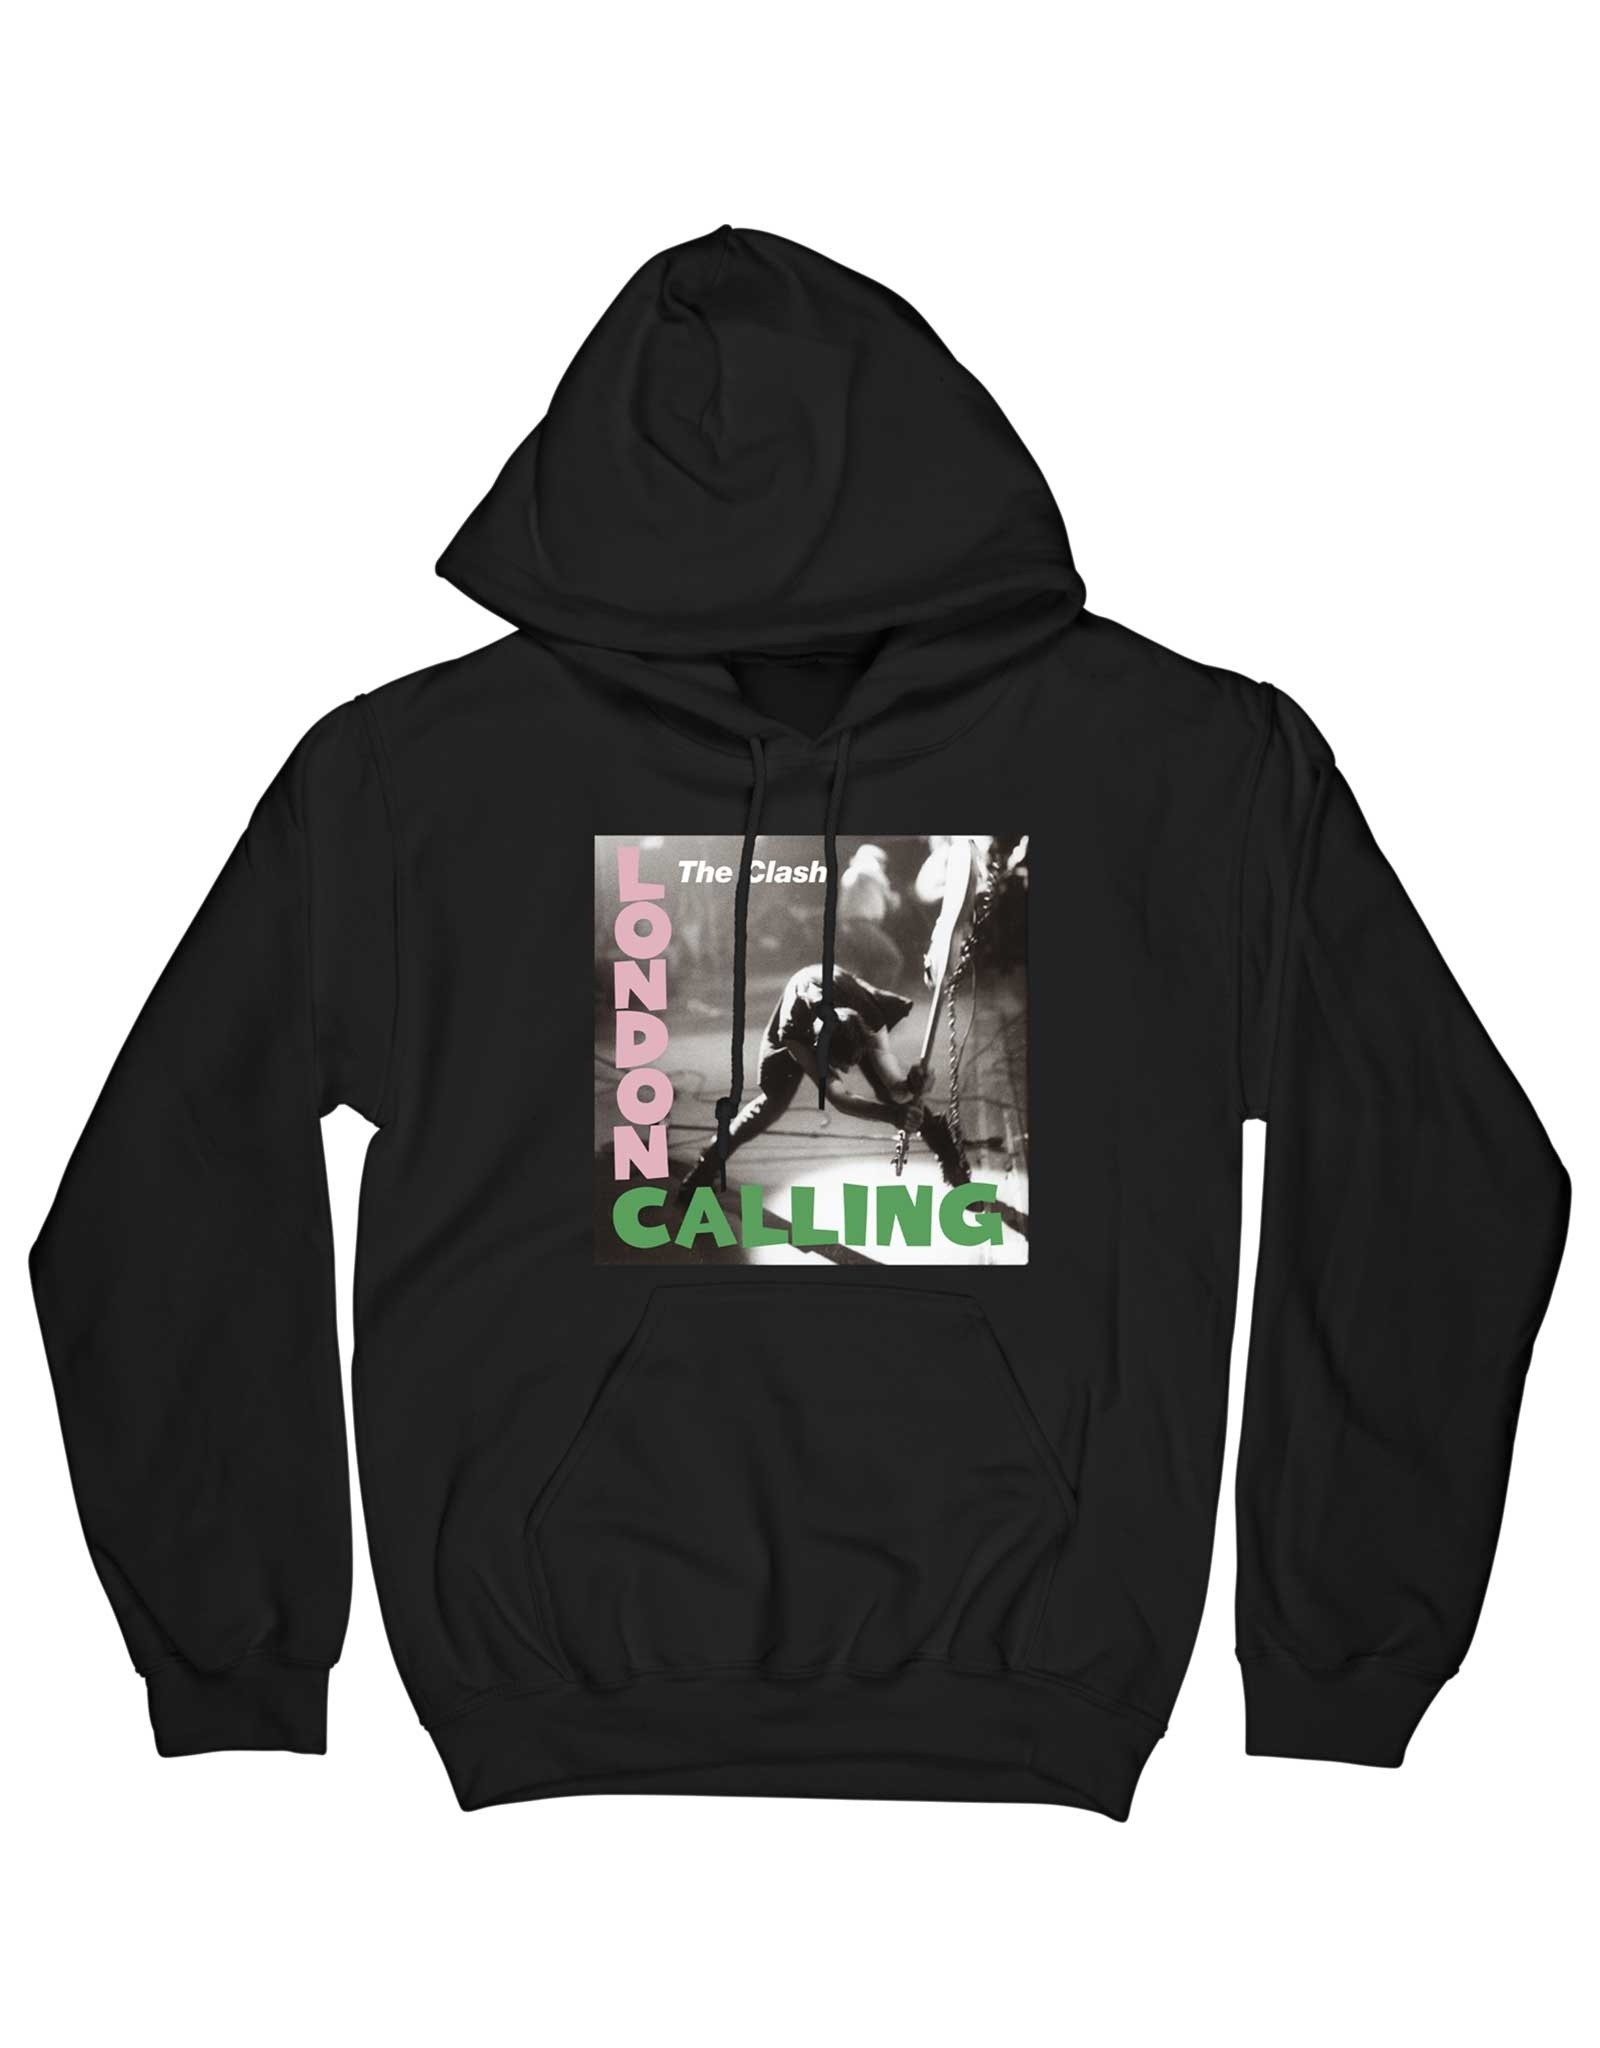 The Clash / London Calling Hooded Pullover